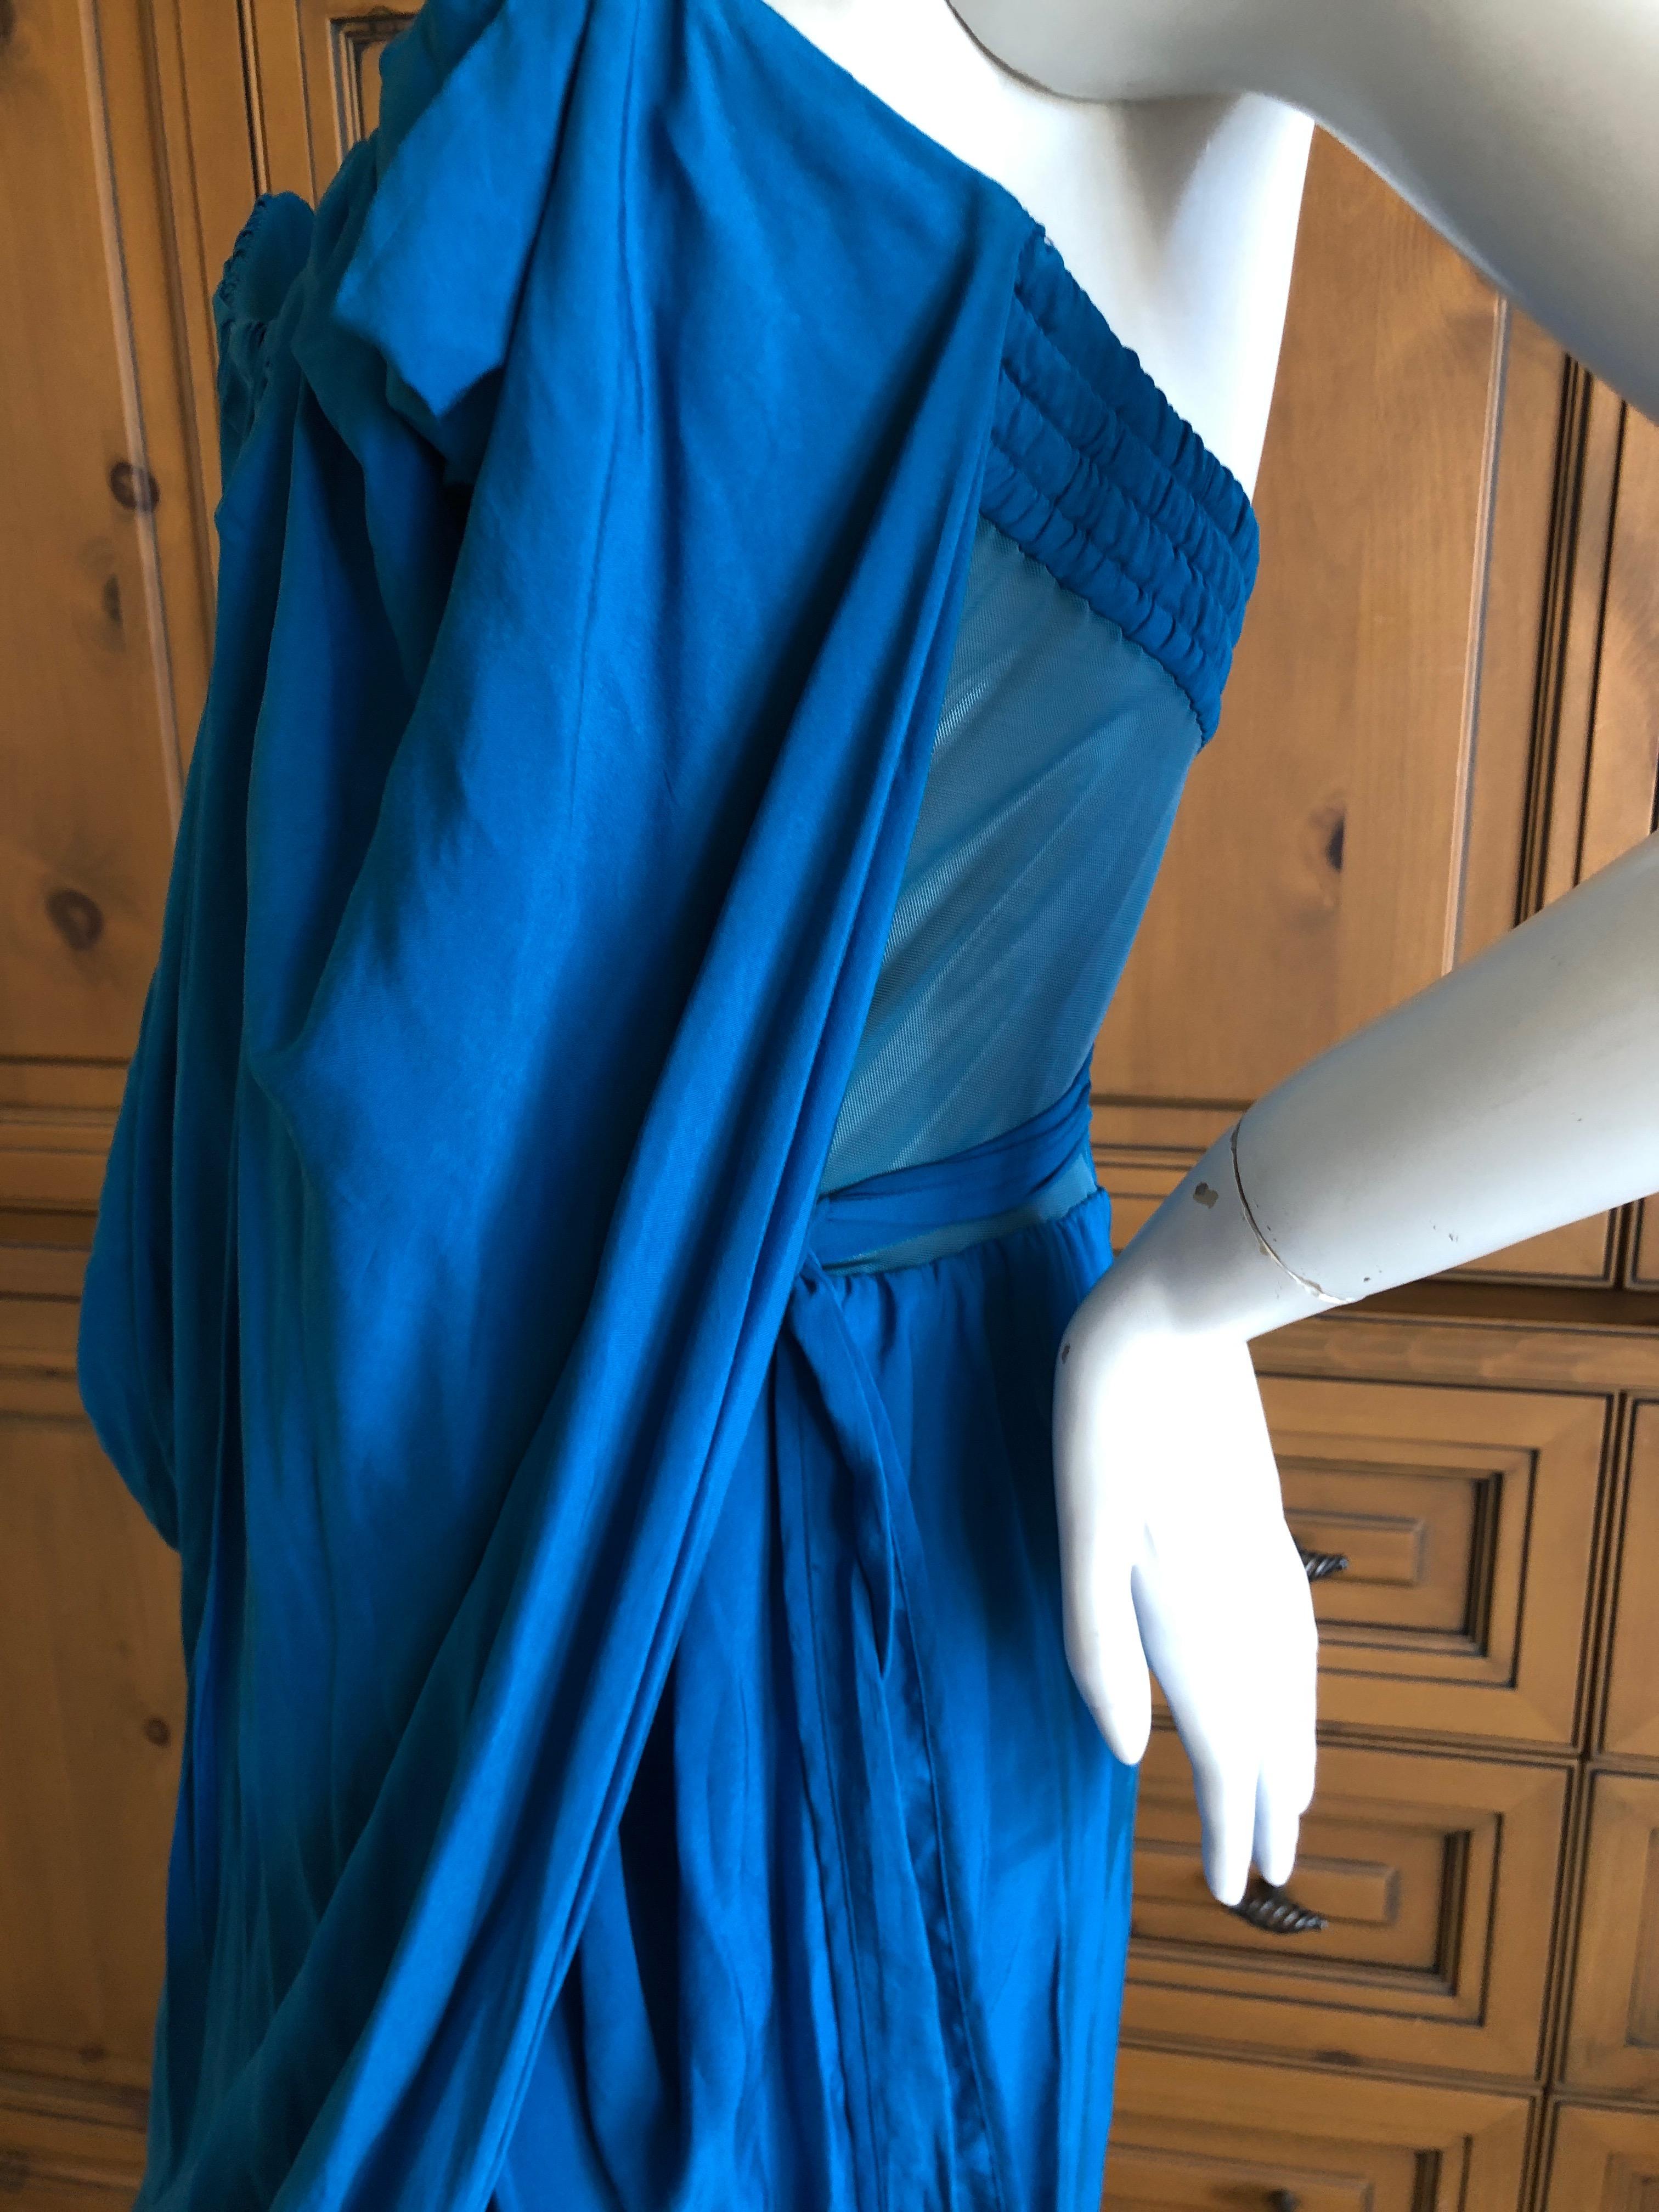 Andreas Kronthaler for Vivienne Westwood Blue Evening Dress with Built In Corset For Sale 1